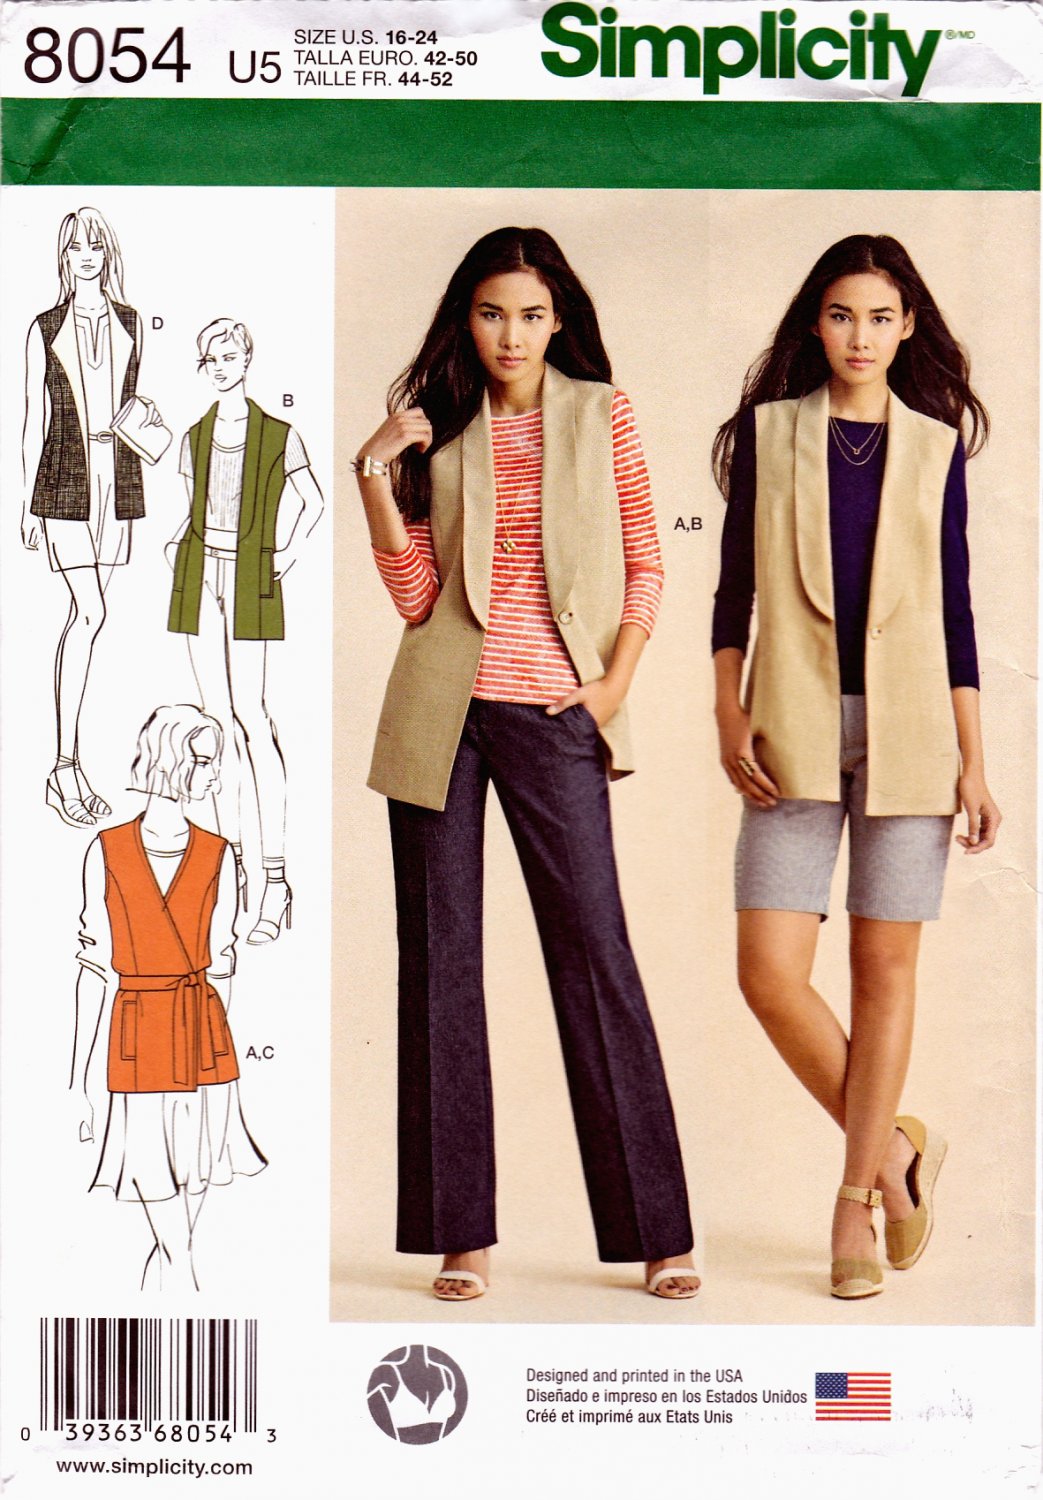 Simplicity 8054 Misses Lined Vest Knit Top All Cup Sizes Sewing Pattern Sizes 16-24